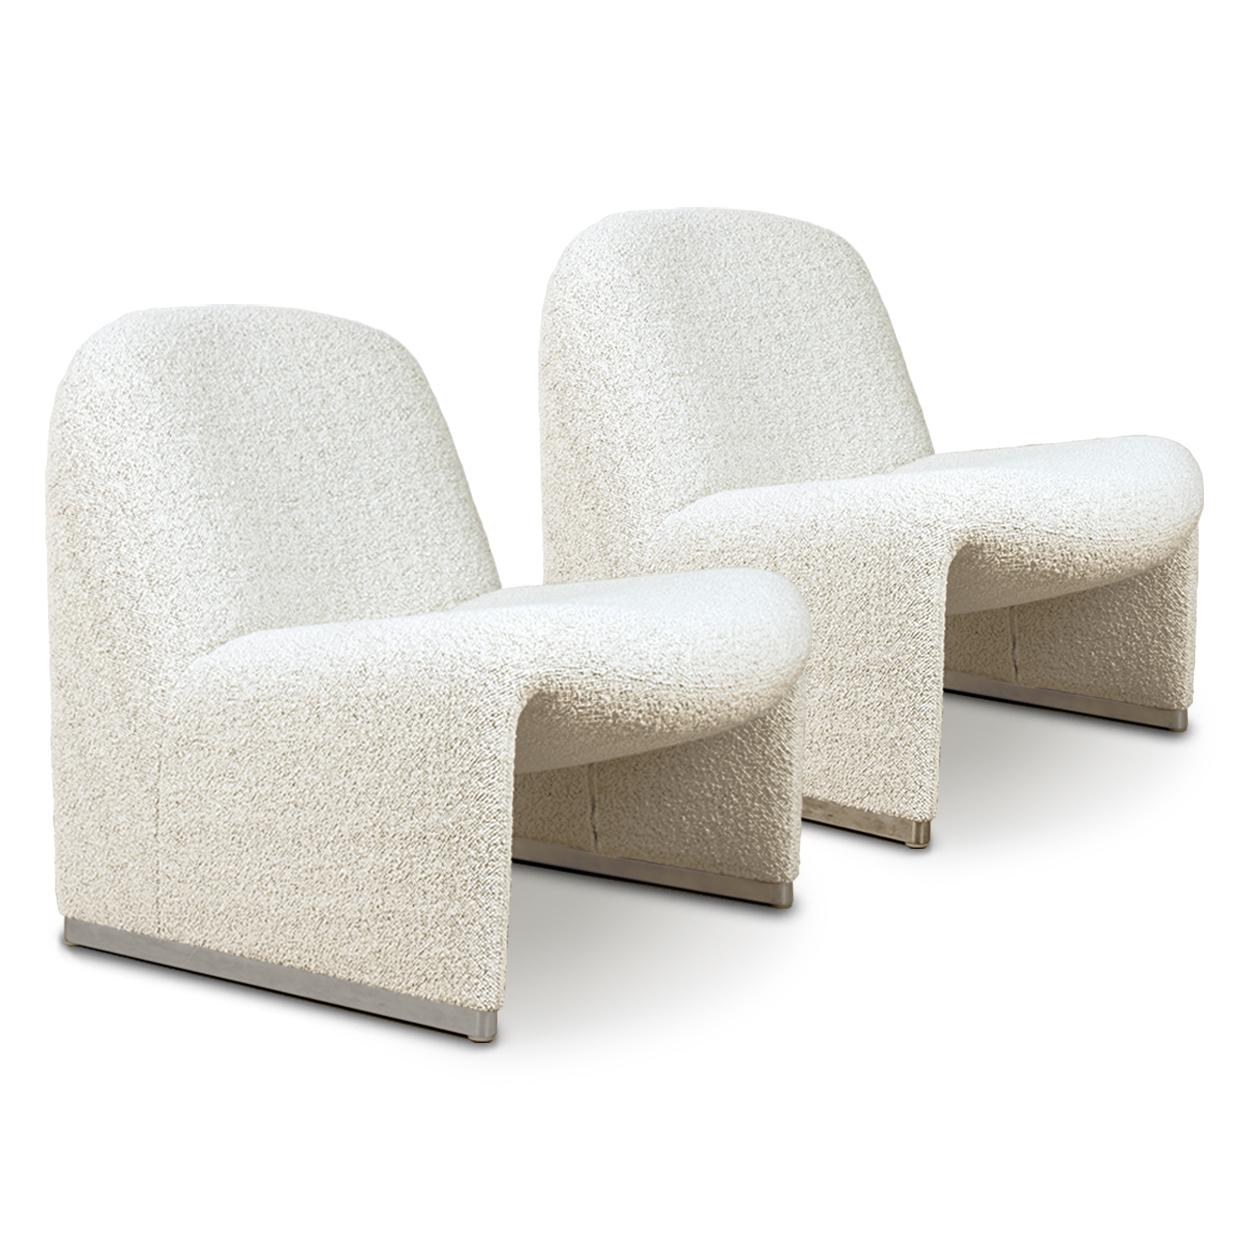 Alky Piretti Chairs, New Upholstered with High-end Fabric by Dedar, Italy 1